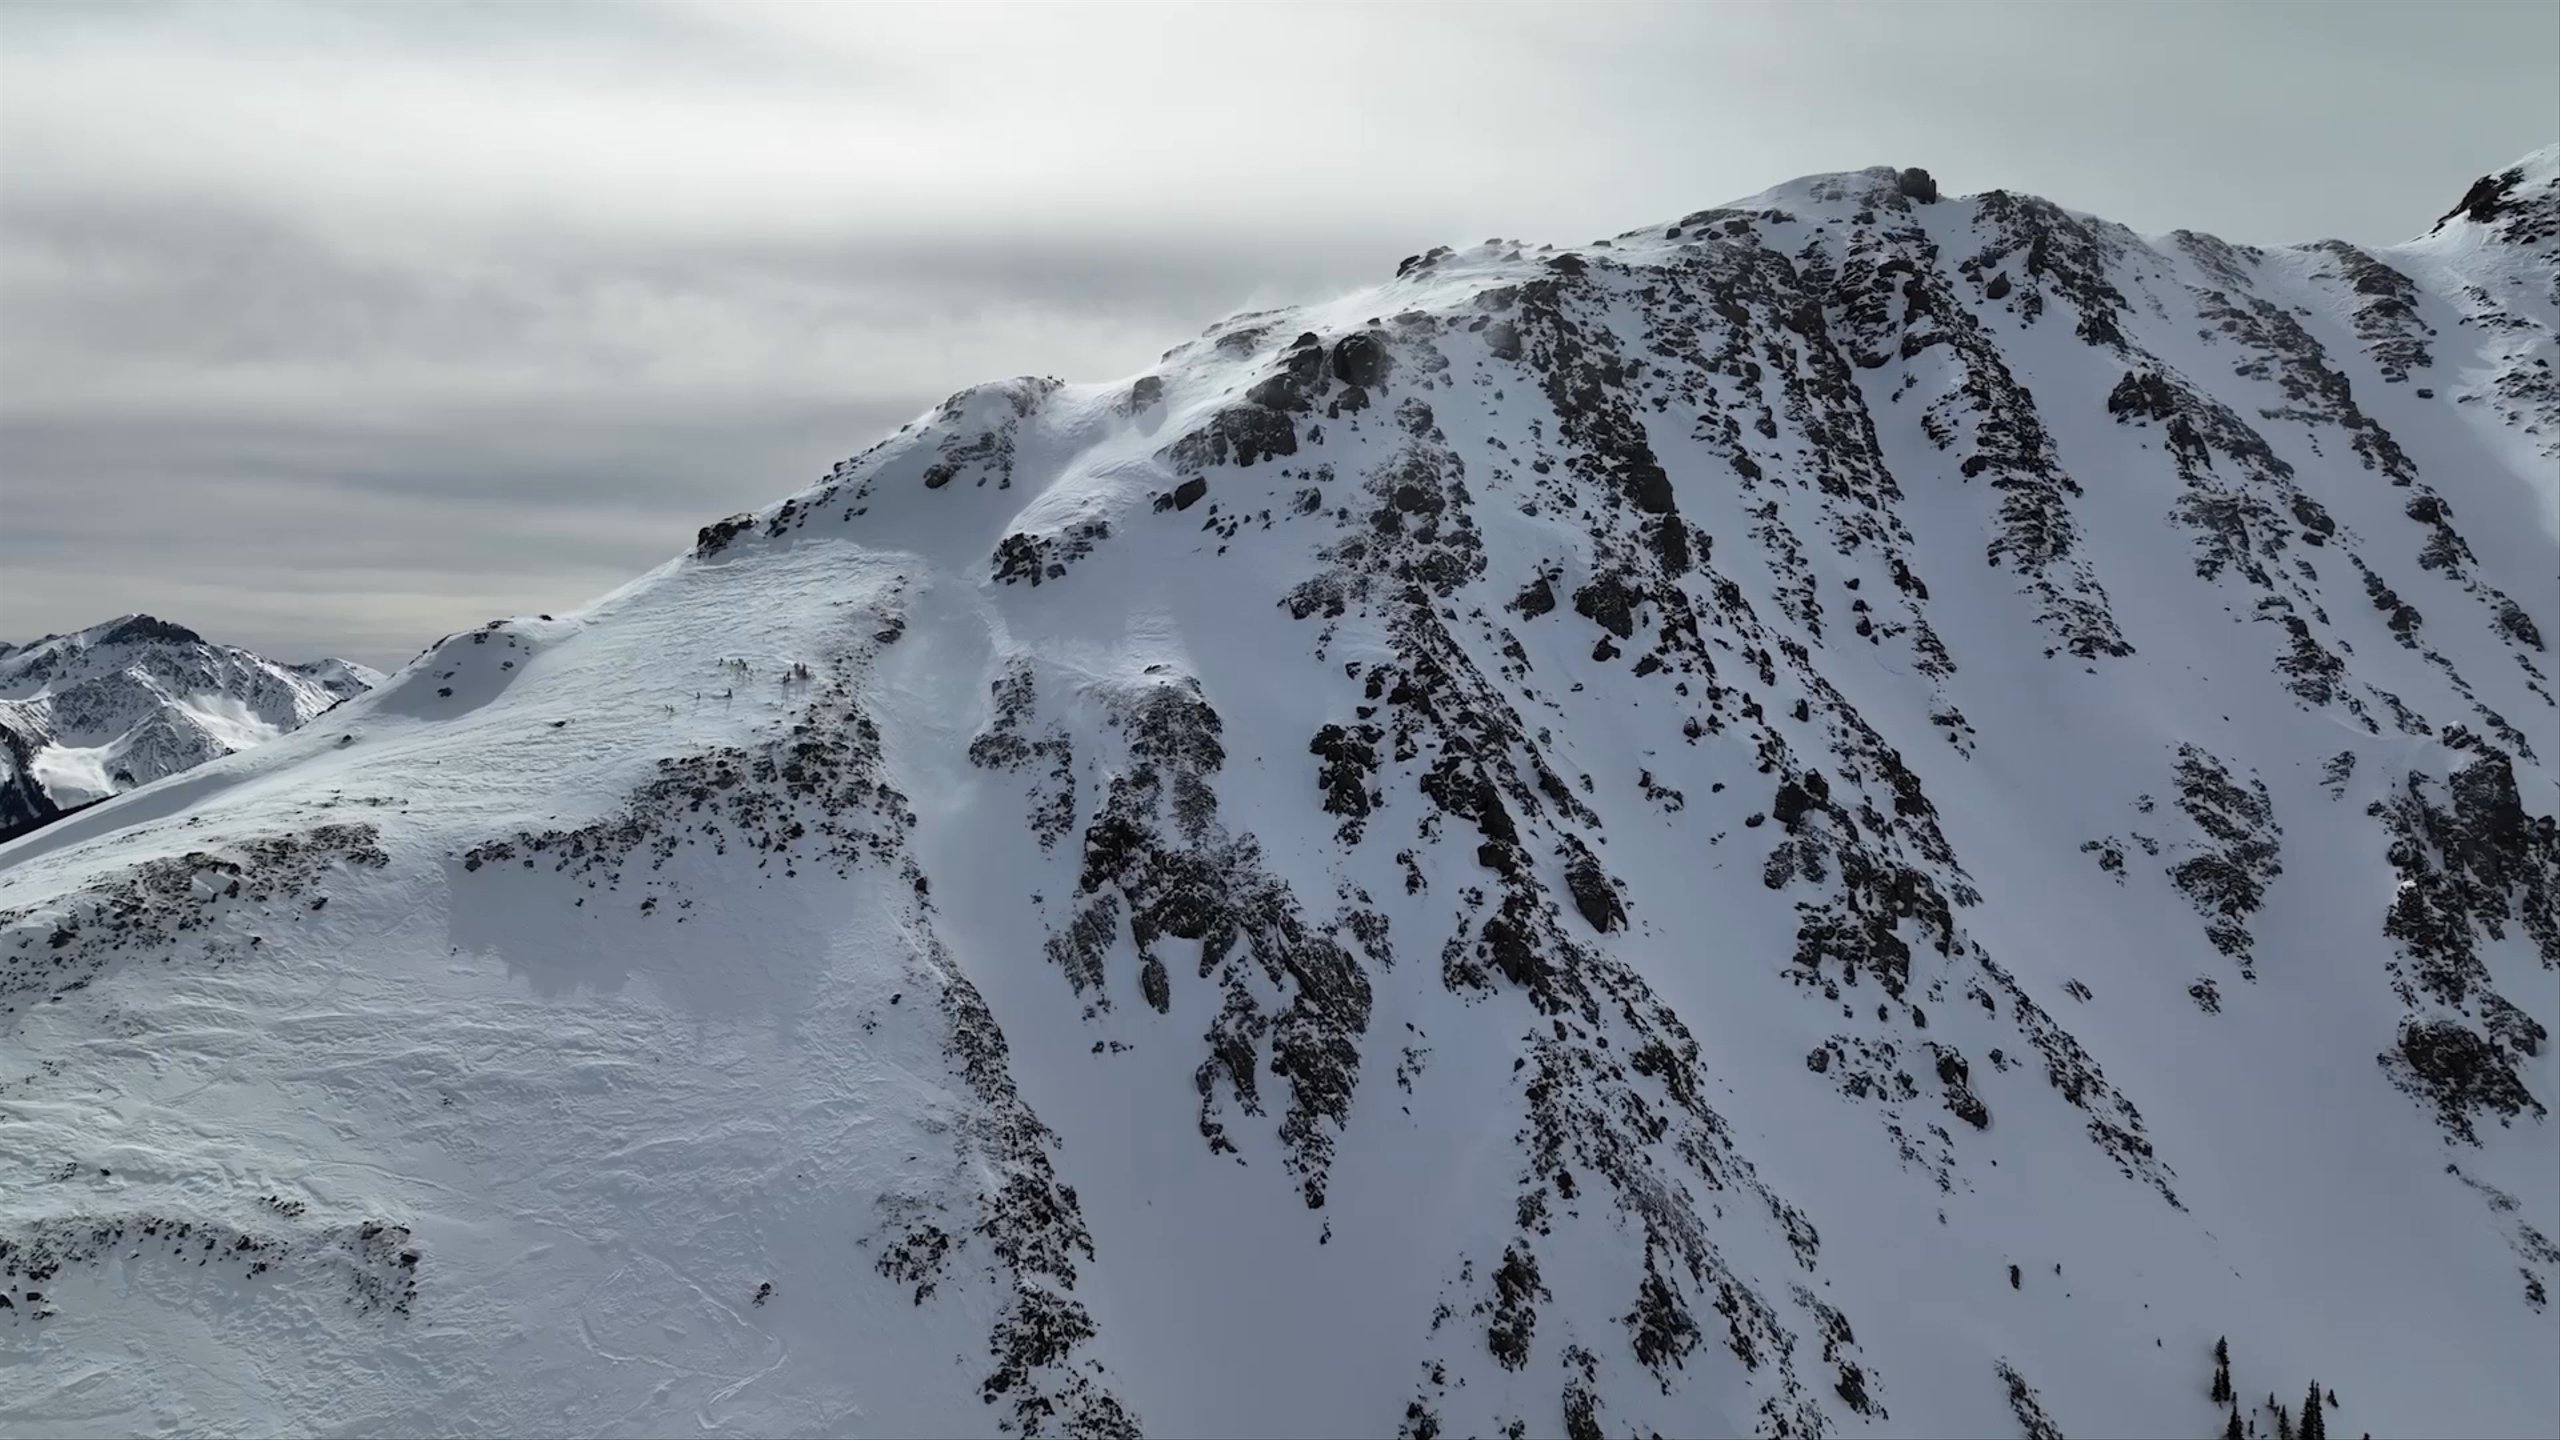 Montage video of skiers and scenic views of Silverton Mountain